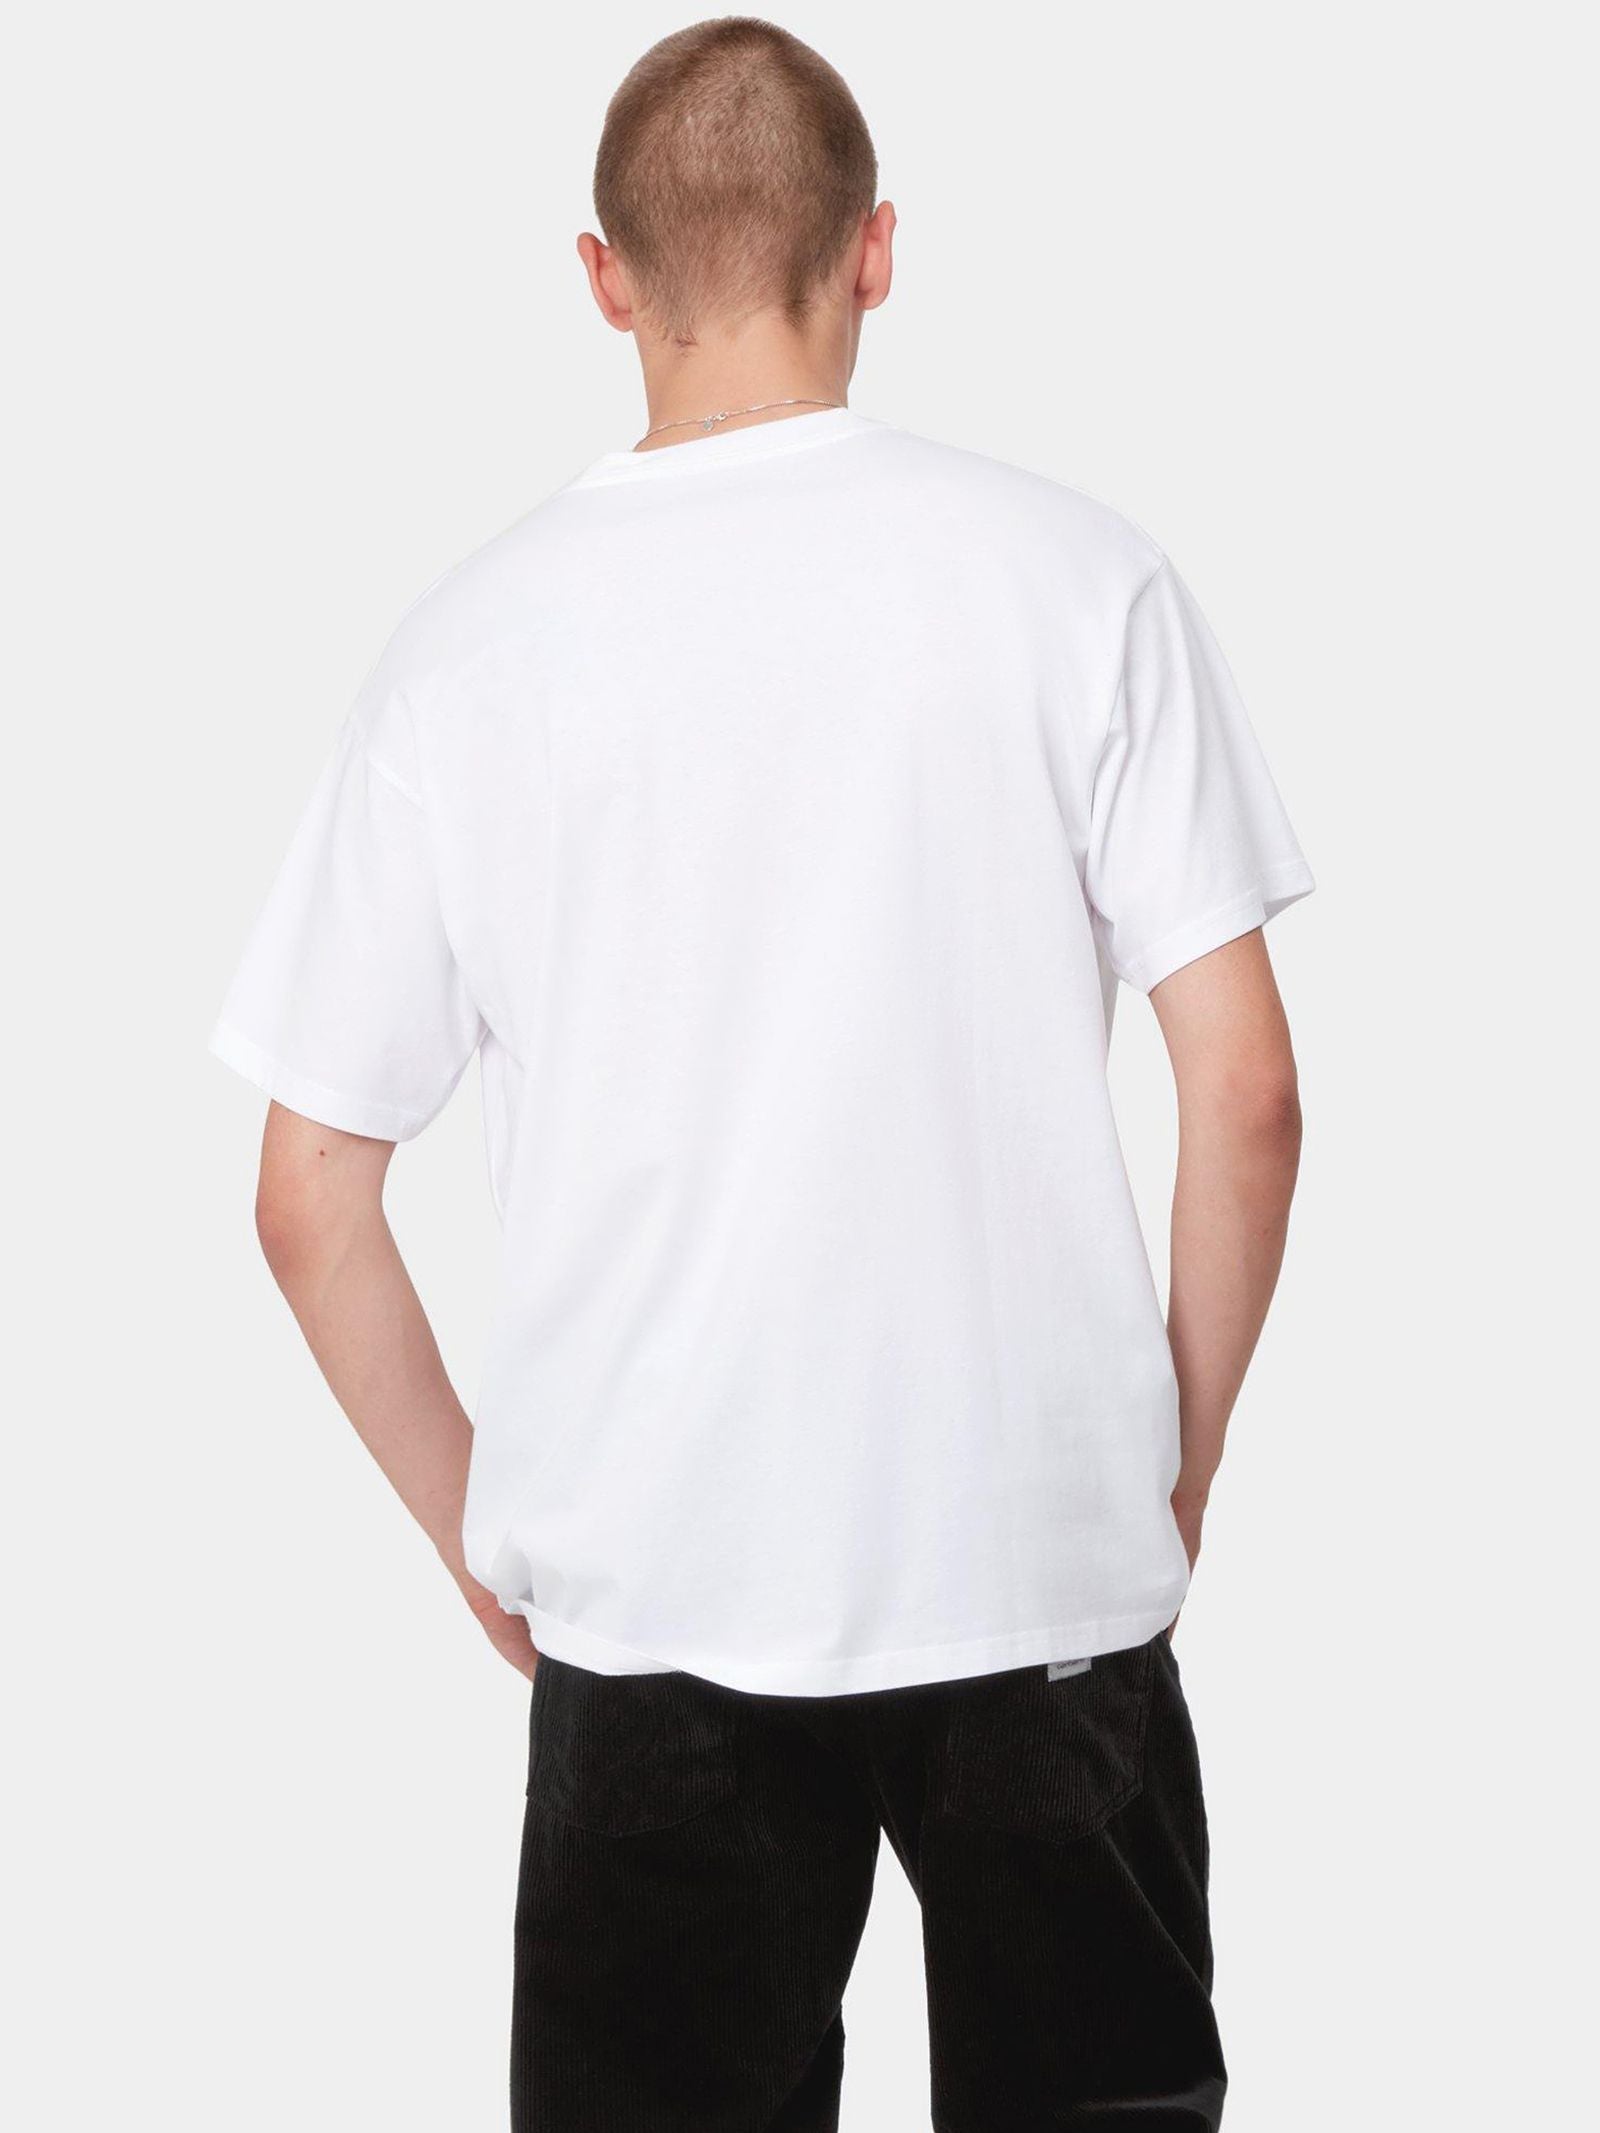 S/S Script Embroidery T-Shirt in Wall/White